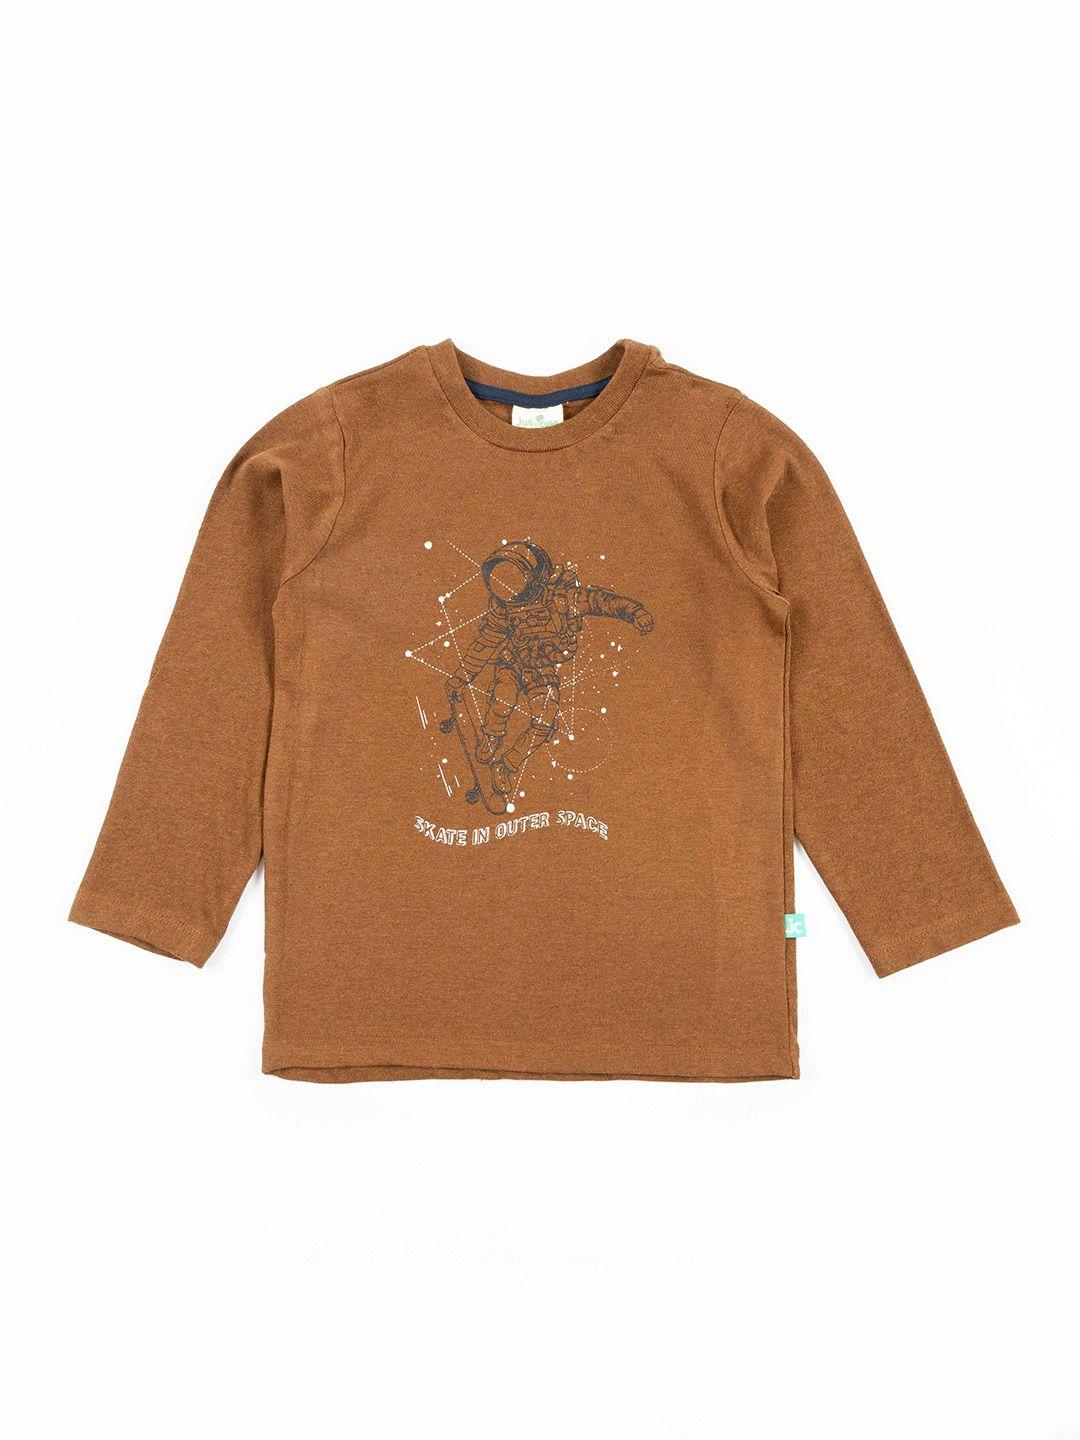 juscubs boys brown graphic printed cotton t-shirt